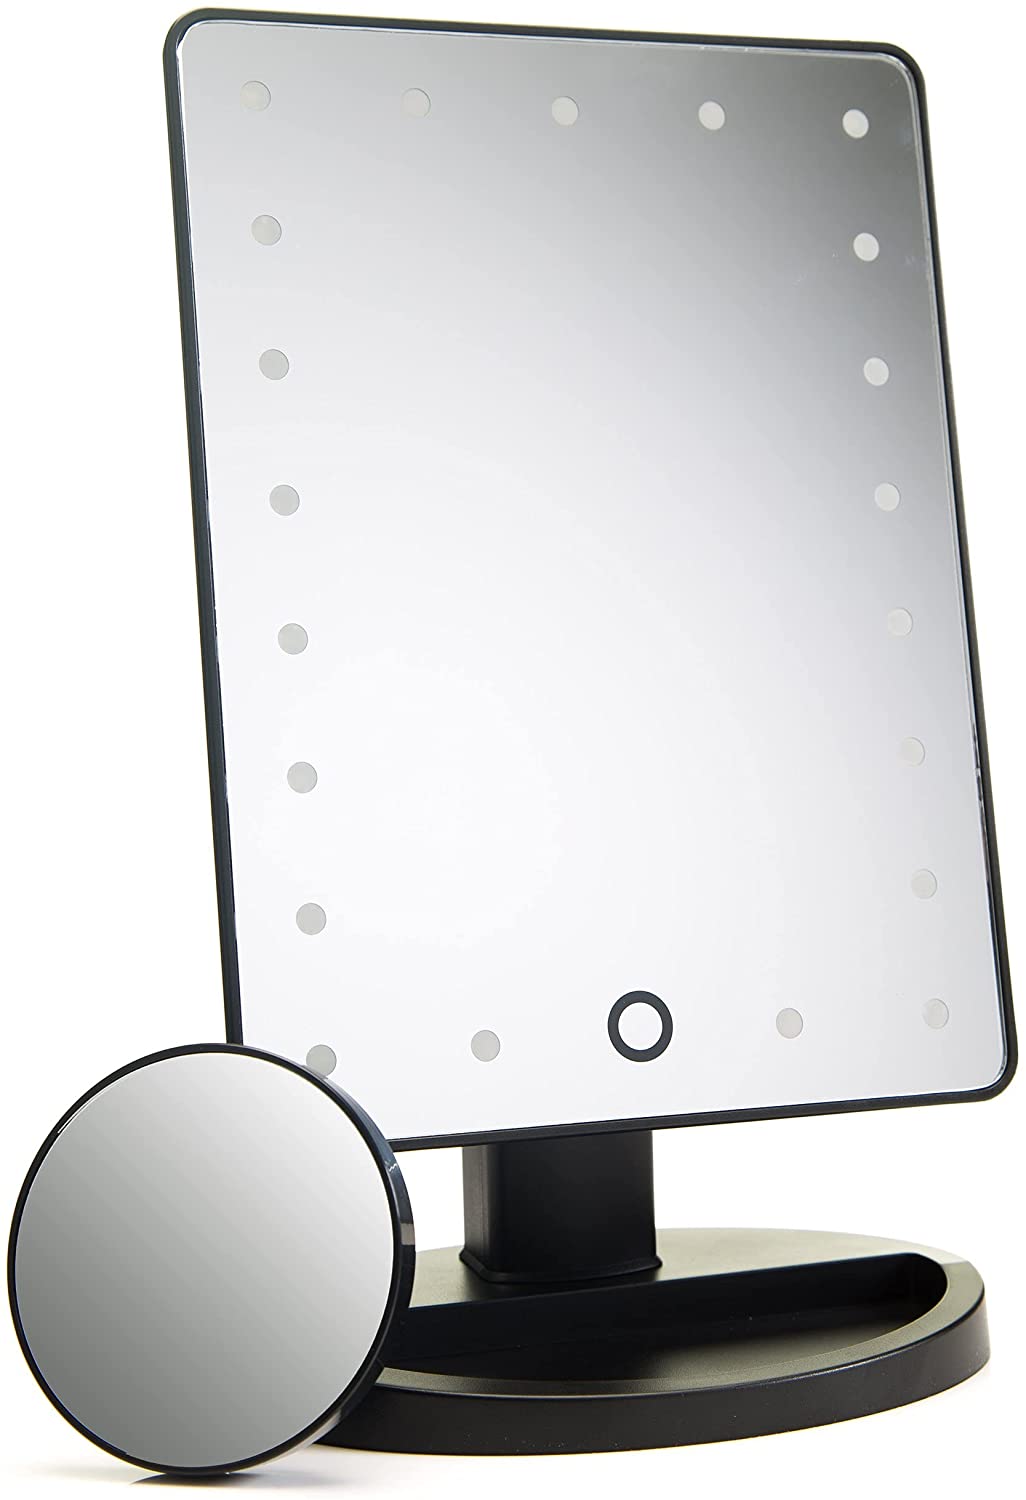 Vanity Mirror with Touch Screen Dimming,Detachable 10X Magnification Spot Mirror.  (LNC)